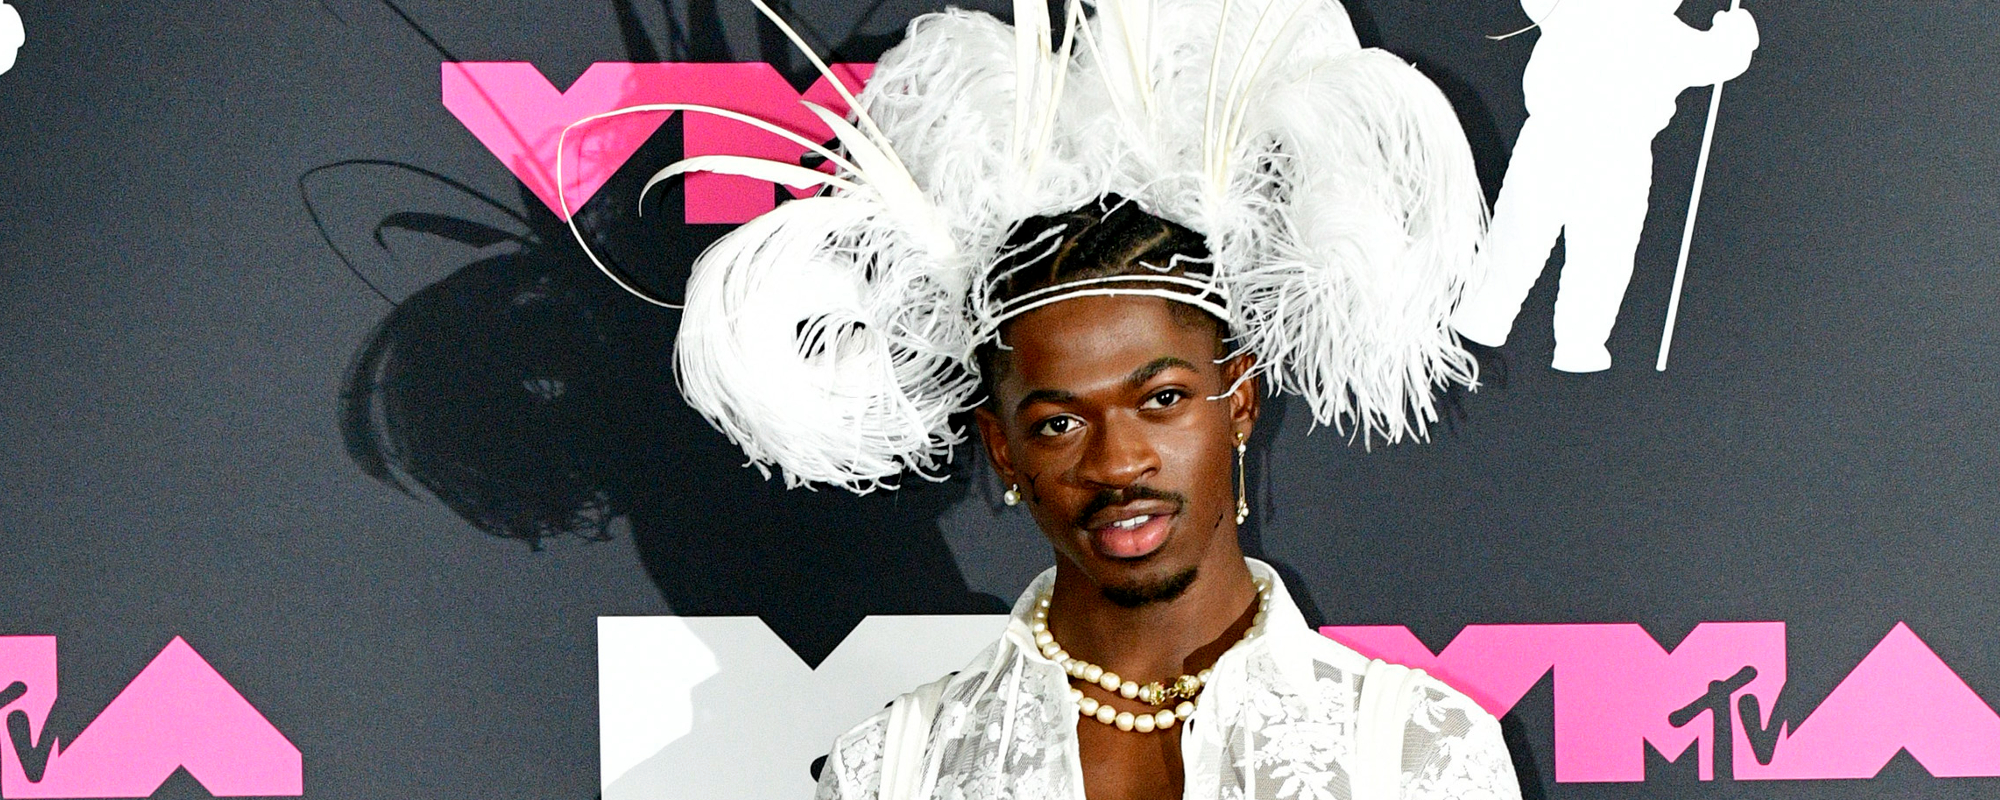 Lil Nas X Denies Making a “Mockery of Jesus” After Cover Art Backlash: “Stop Trying to Gatekeep a Religion”